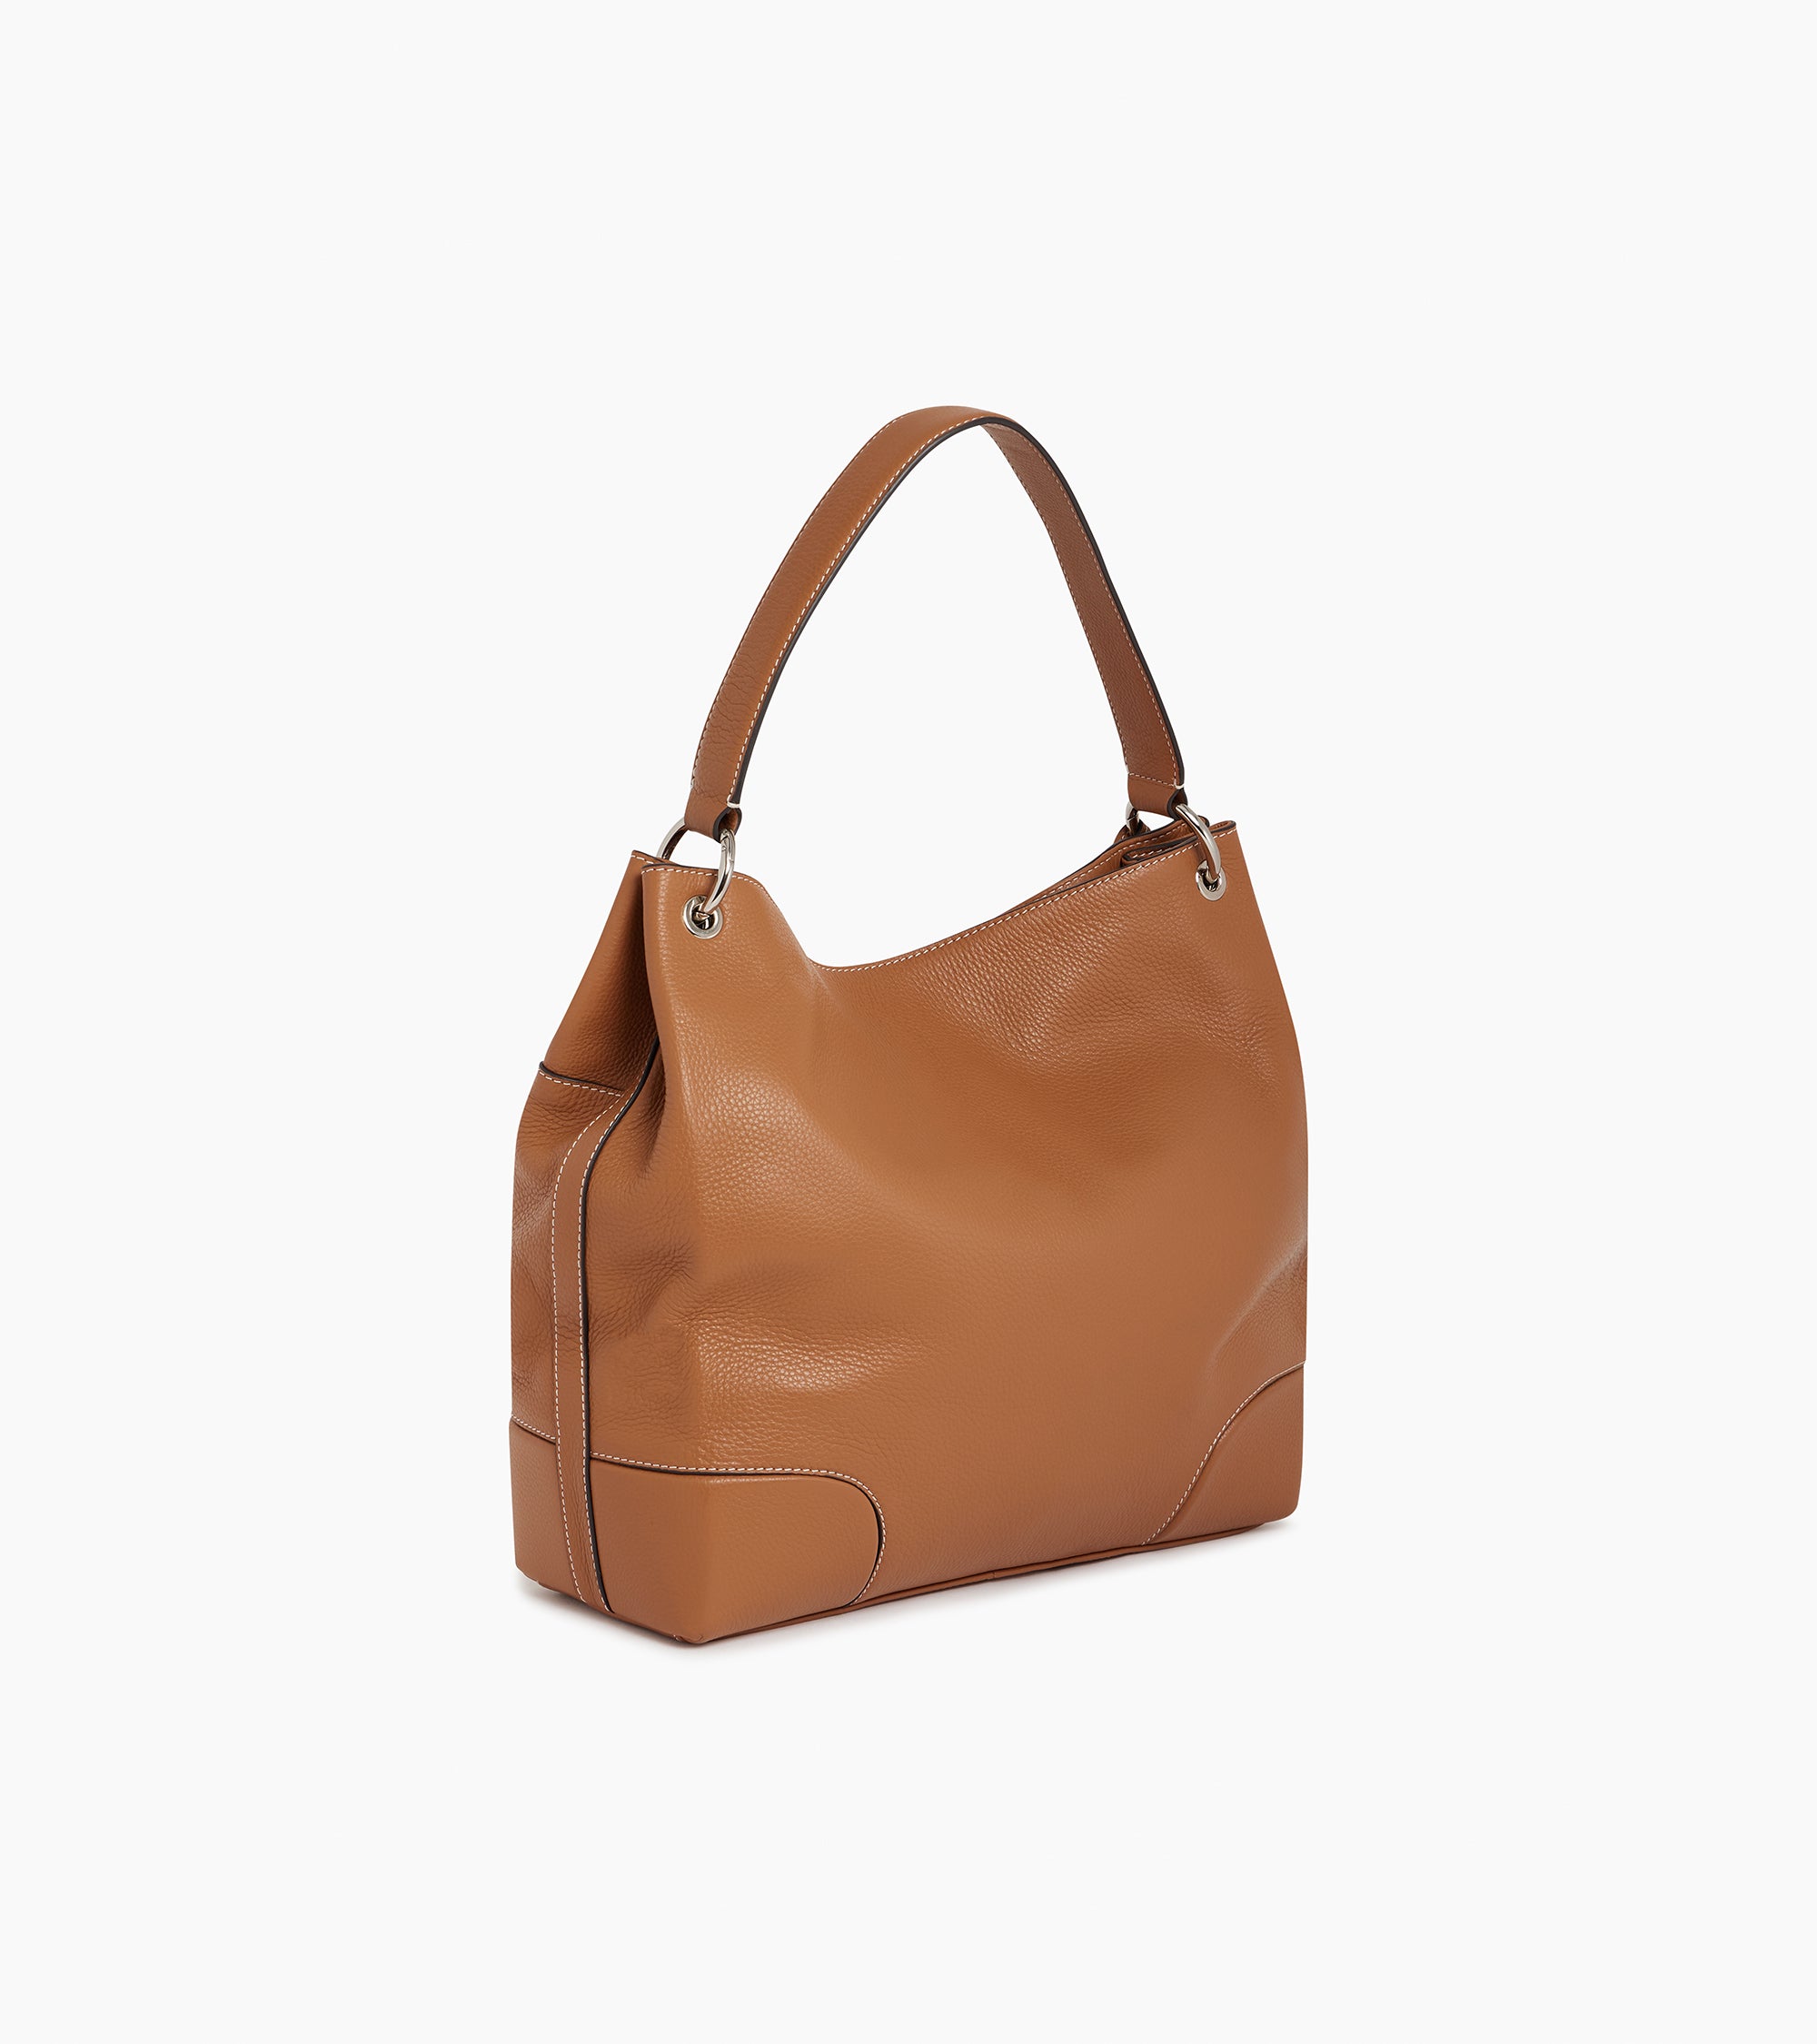 Romy large hobo bag in pebbled leather